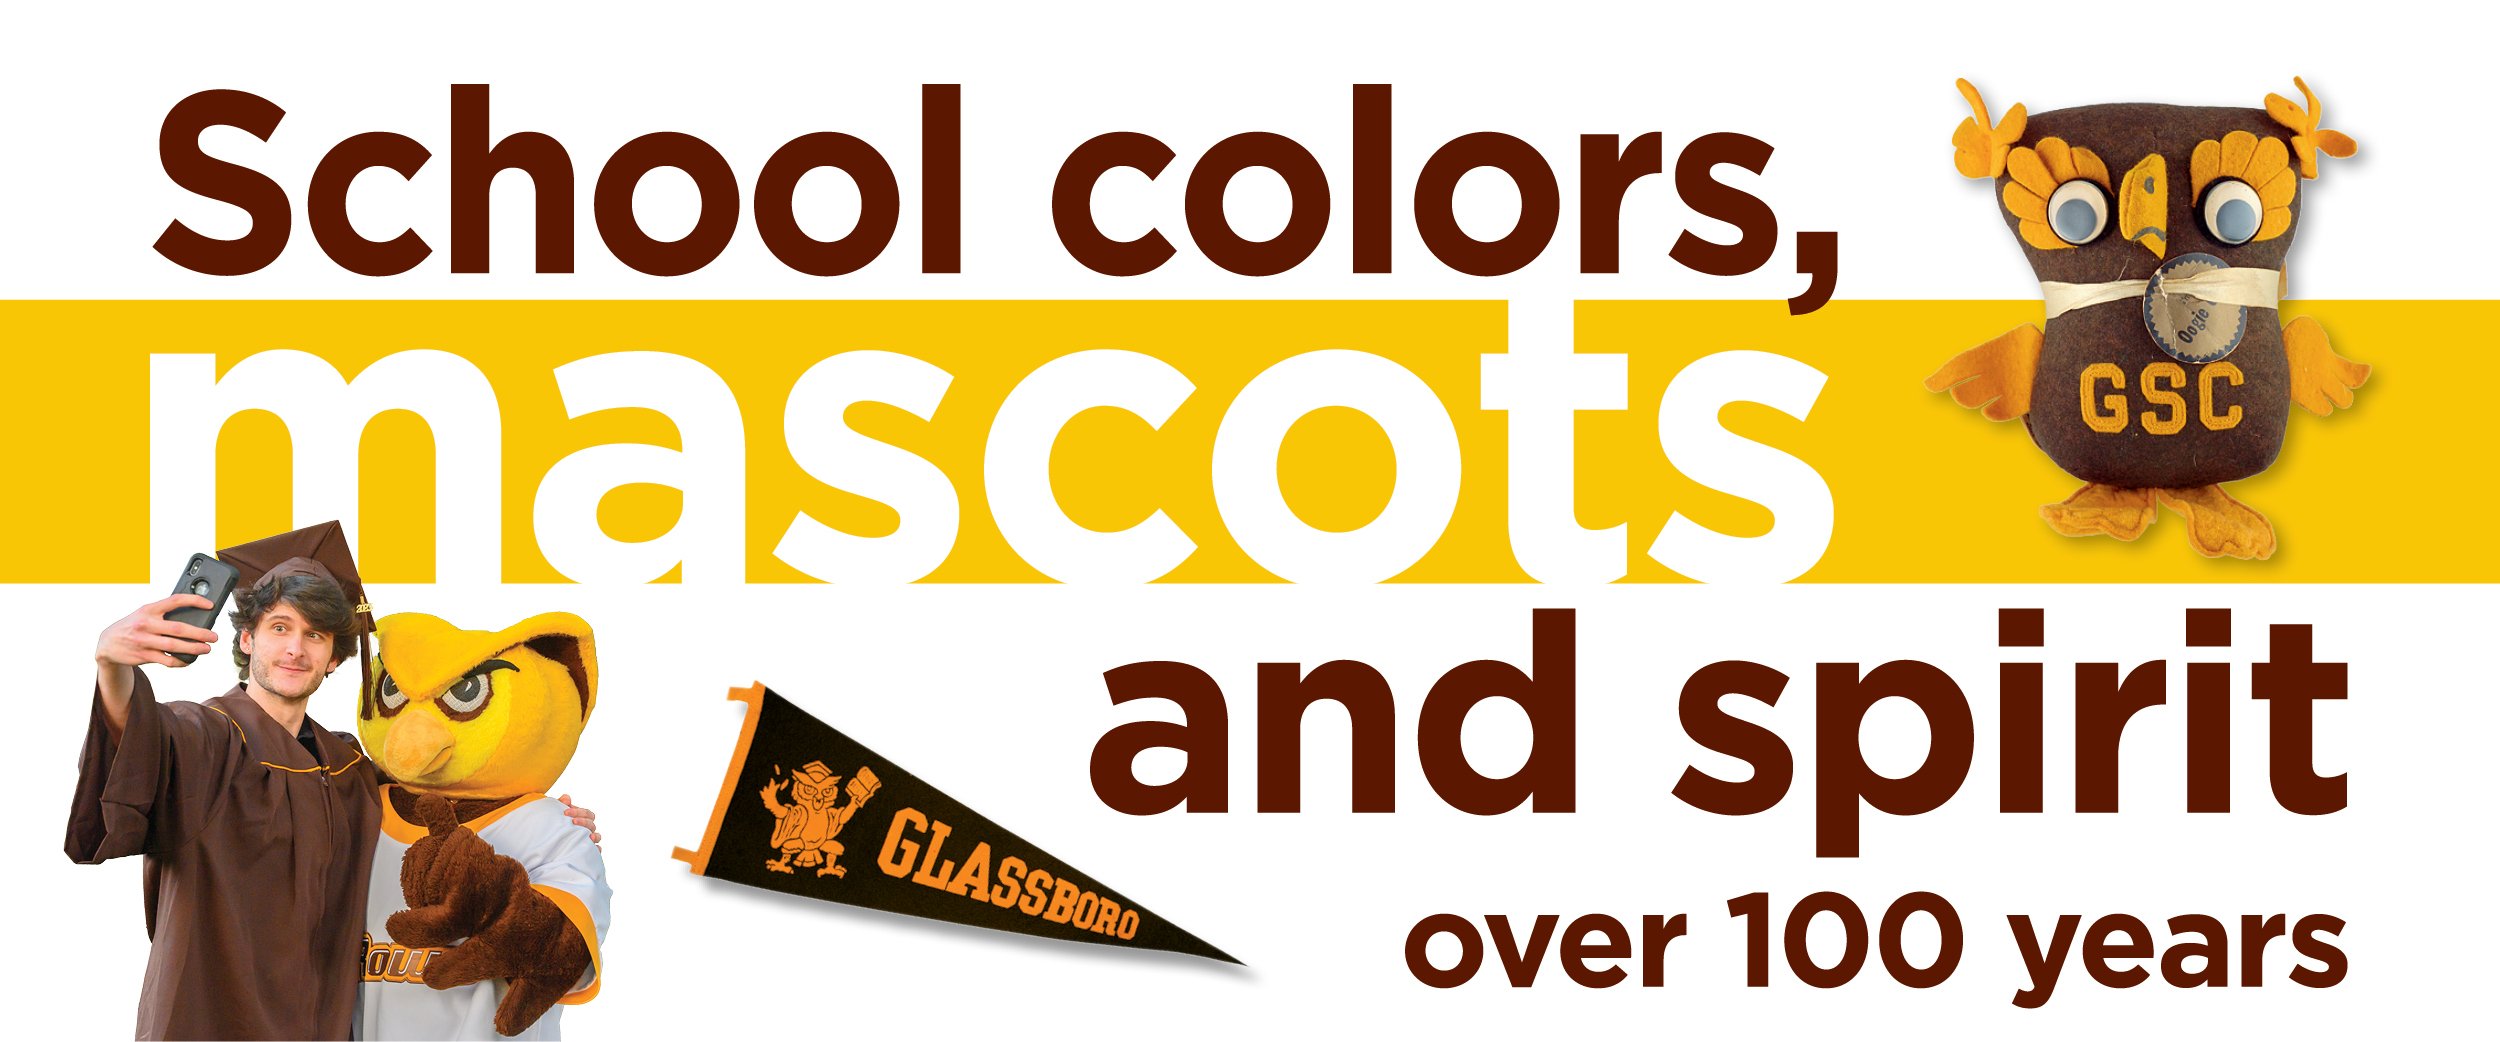 School colors, mascots and spirit over 100 years